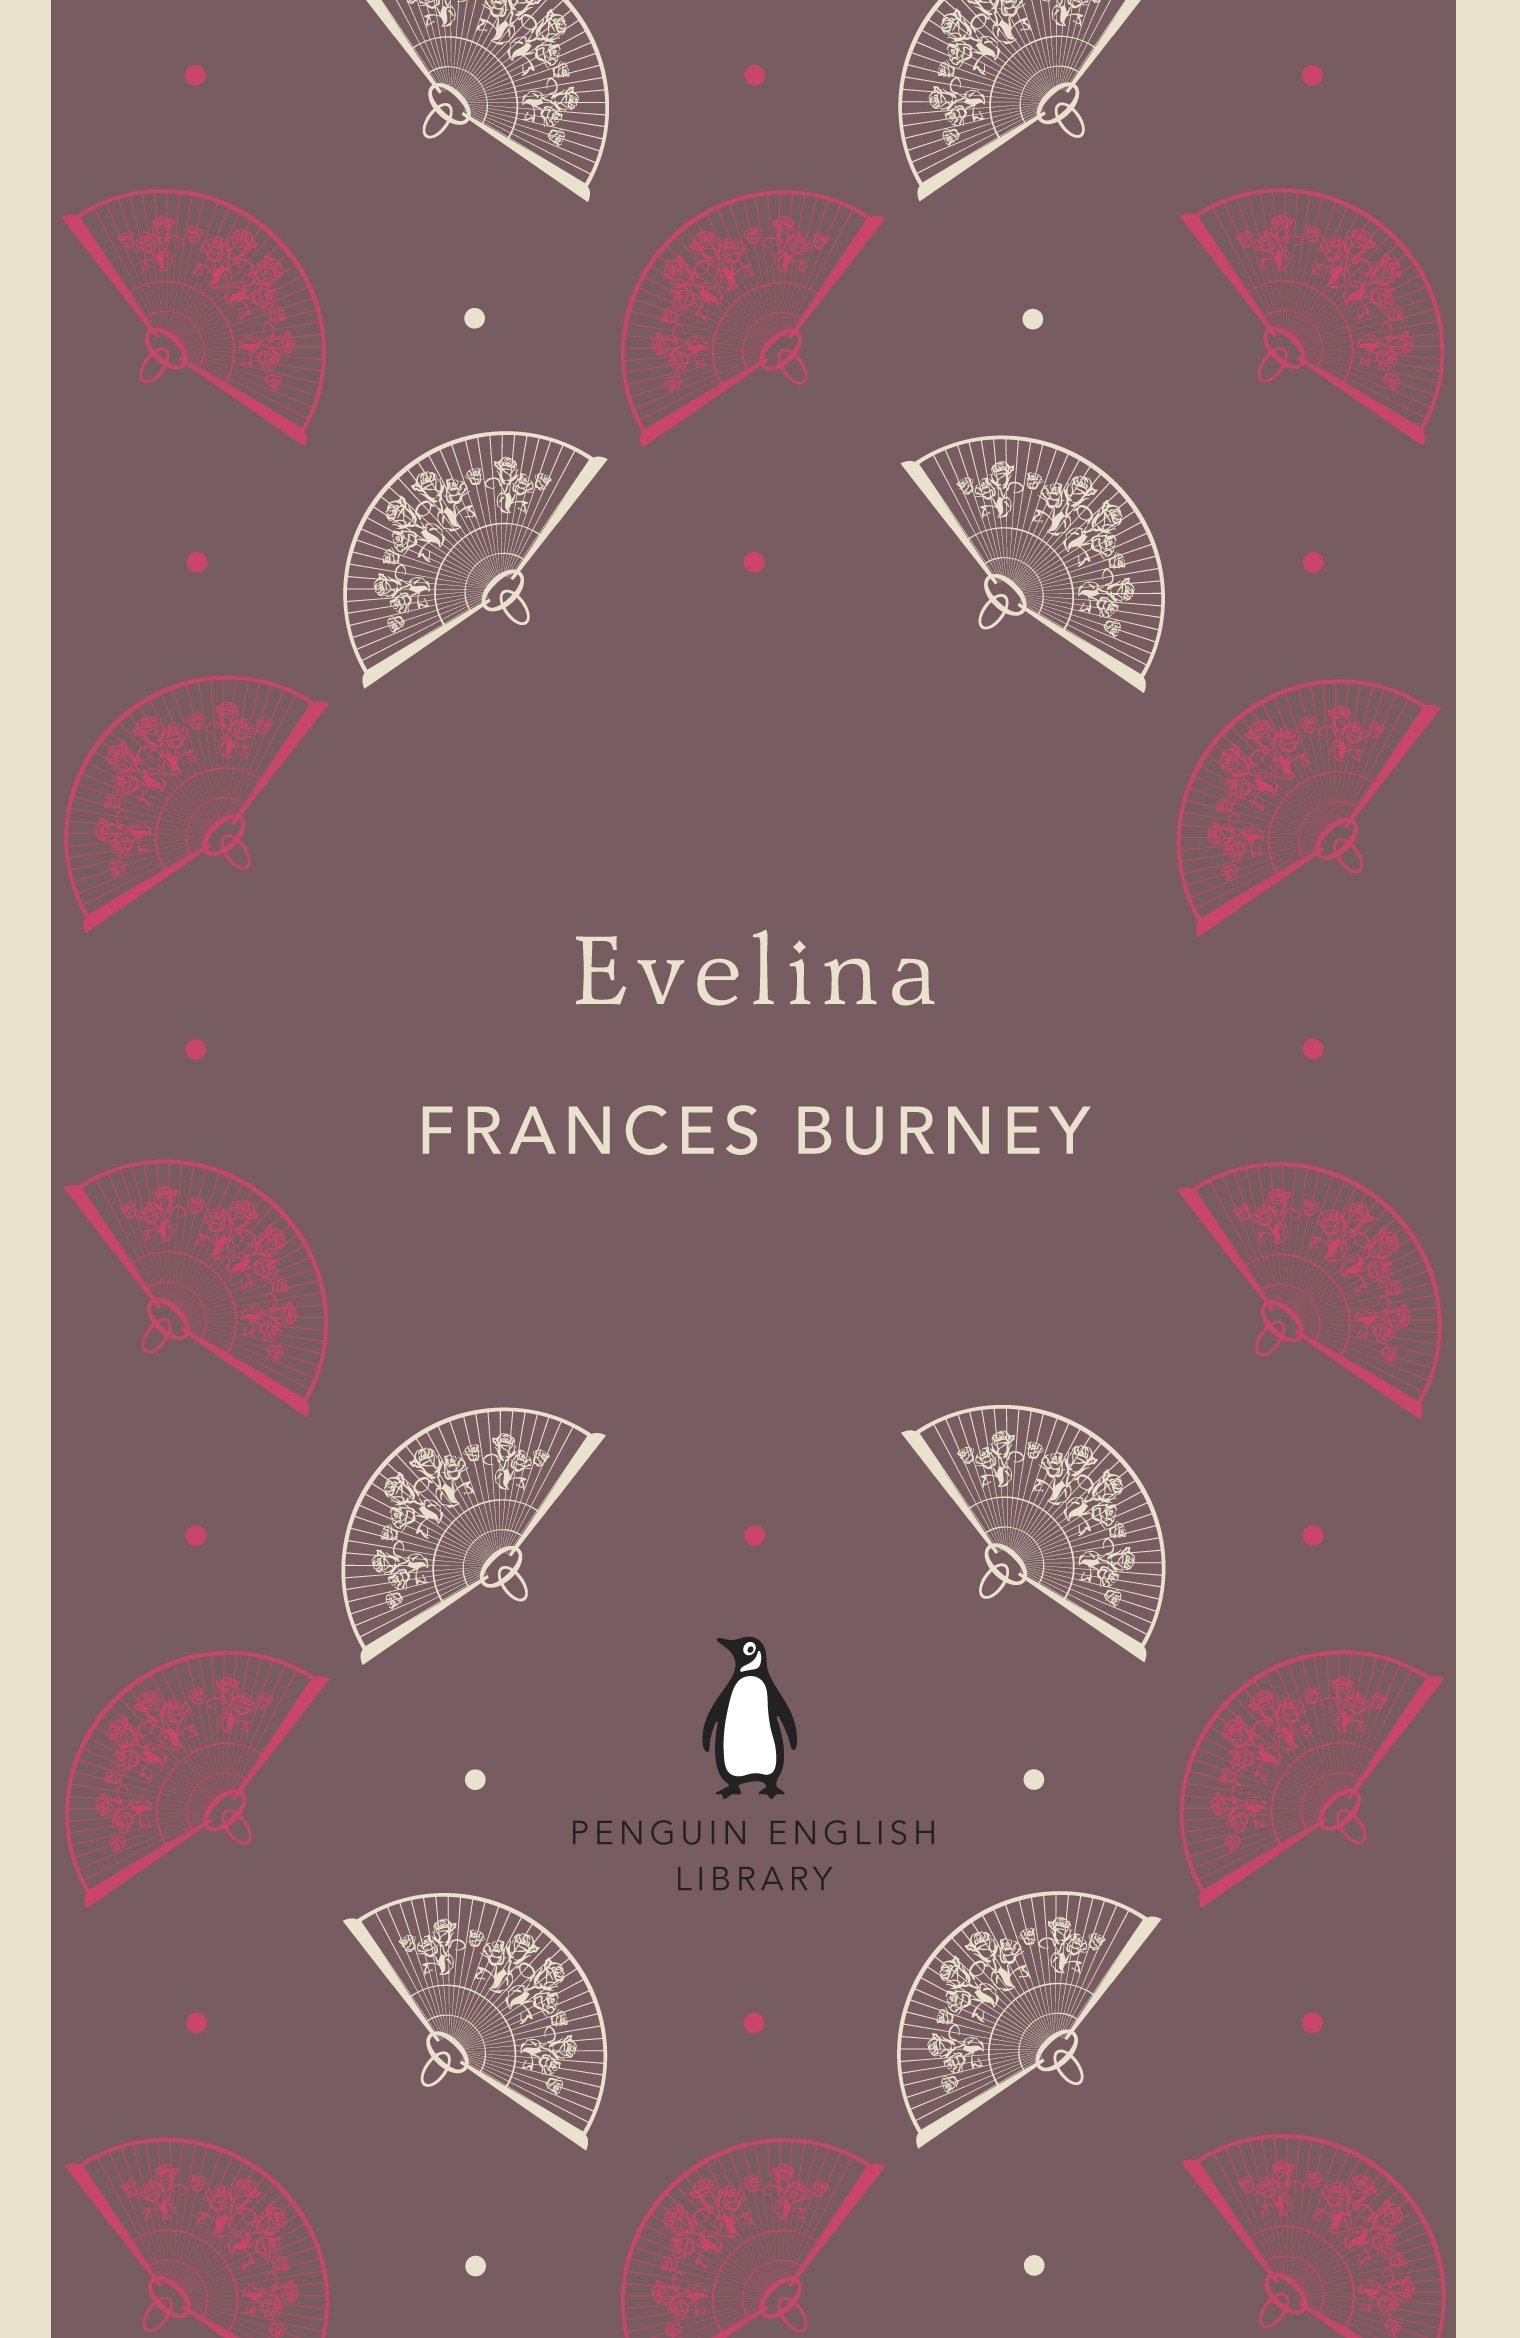 Book “Evelina” by Frances Burney — May 31, 2012